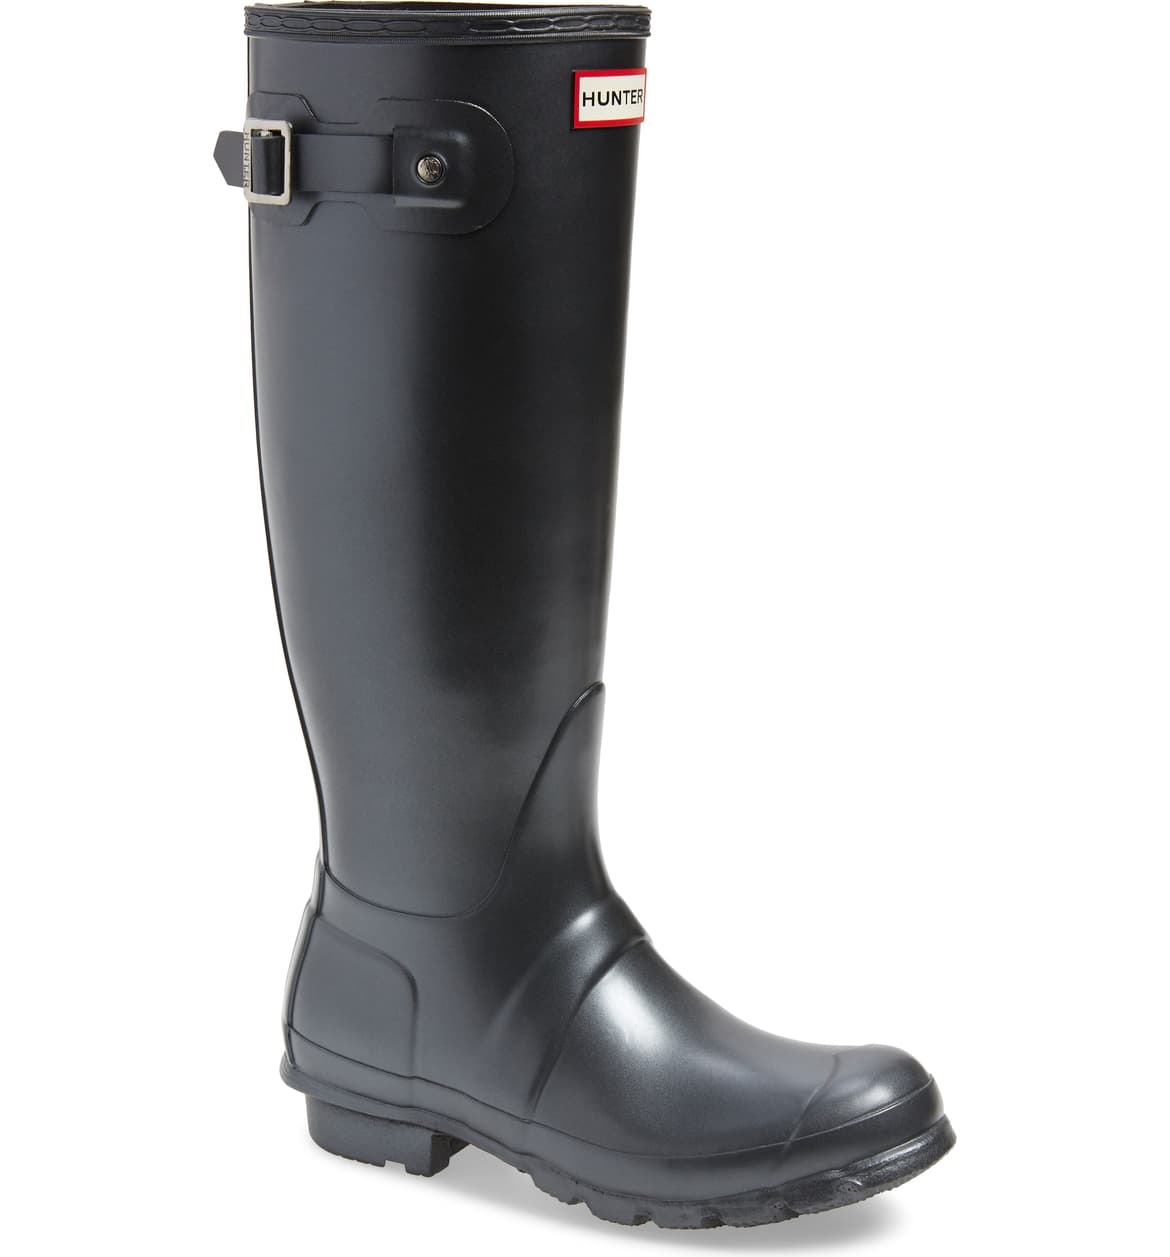 hunter rain boots at the nordstrom winter sale